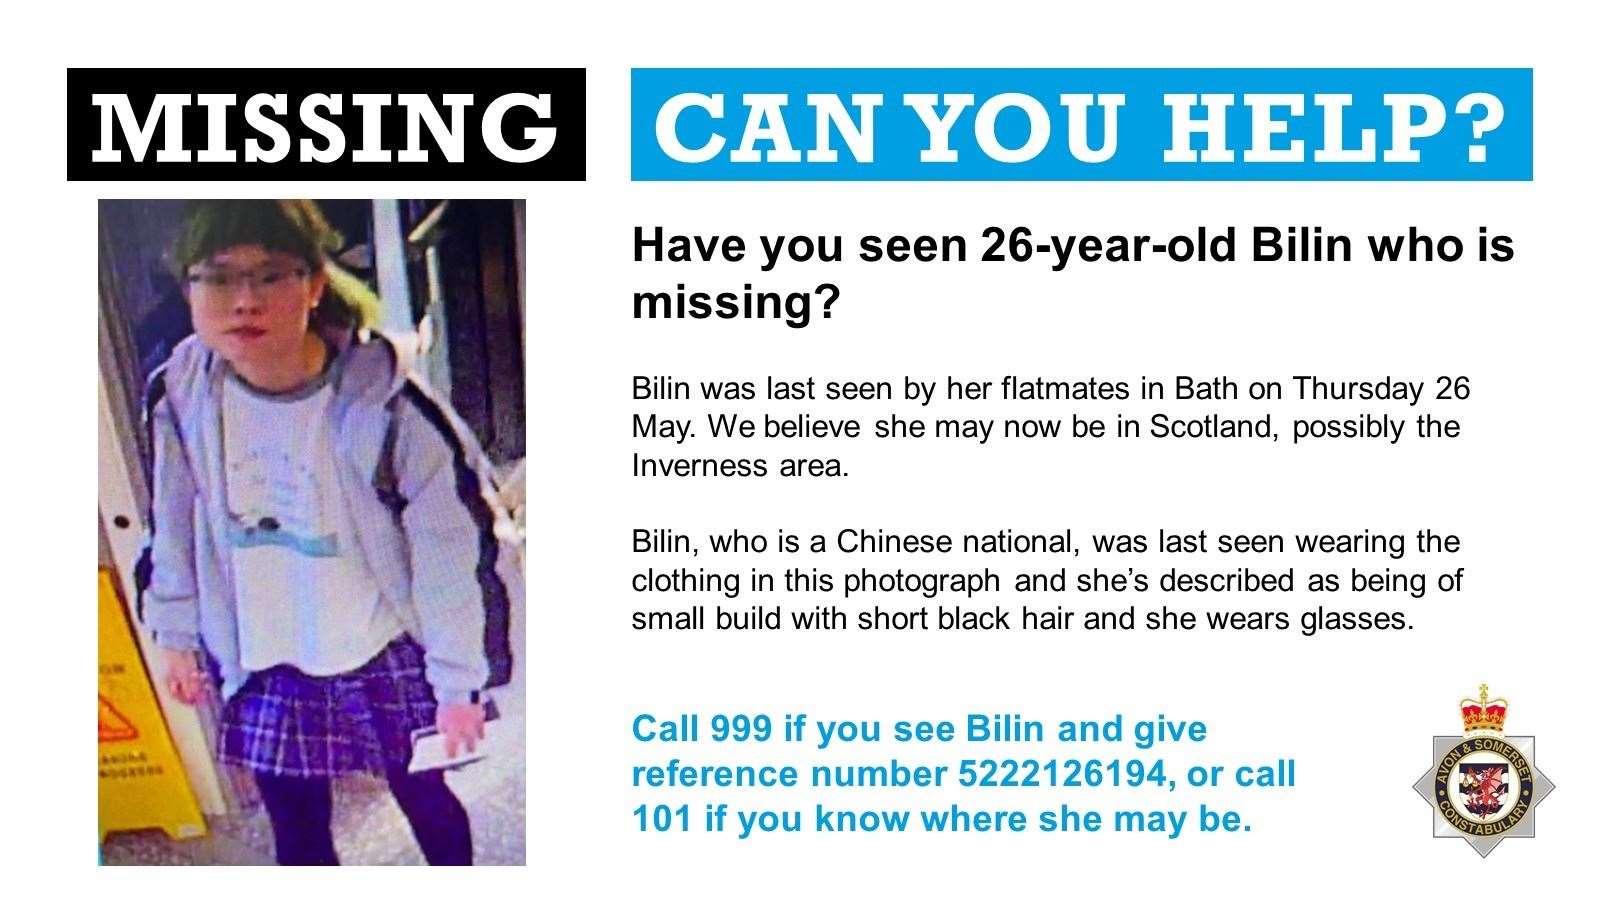 We're trying to locate #missing 26-year-old Bilin, who was last seen by her flatmates in #Bath on Thursday. We believe she may now be in #Scotland, possibly the #Inverness area. Full details in our appeal poster below